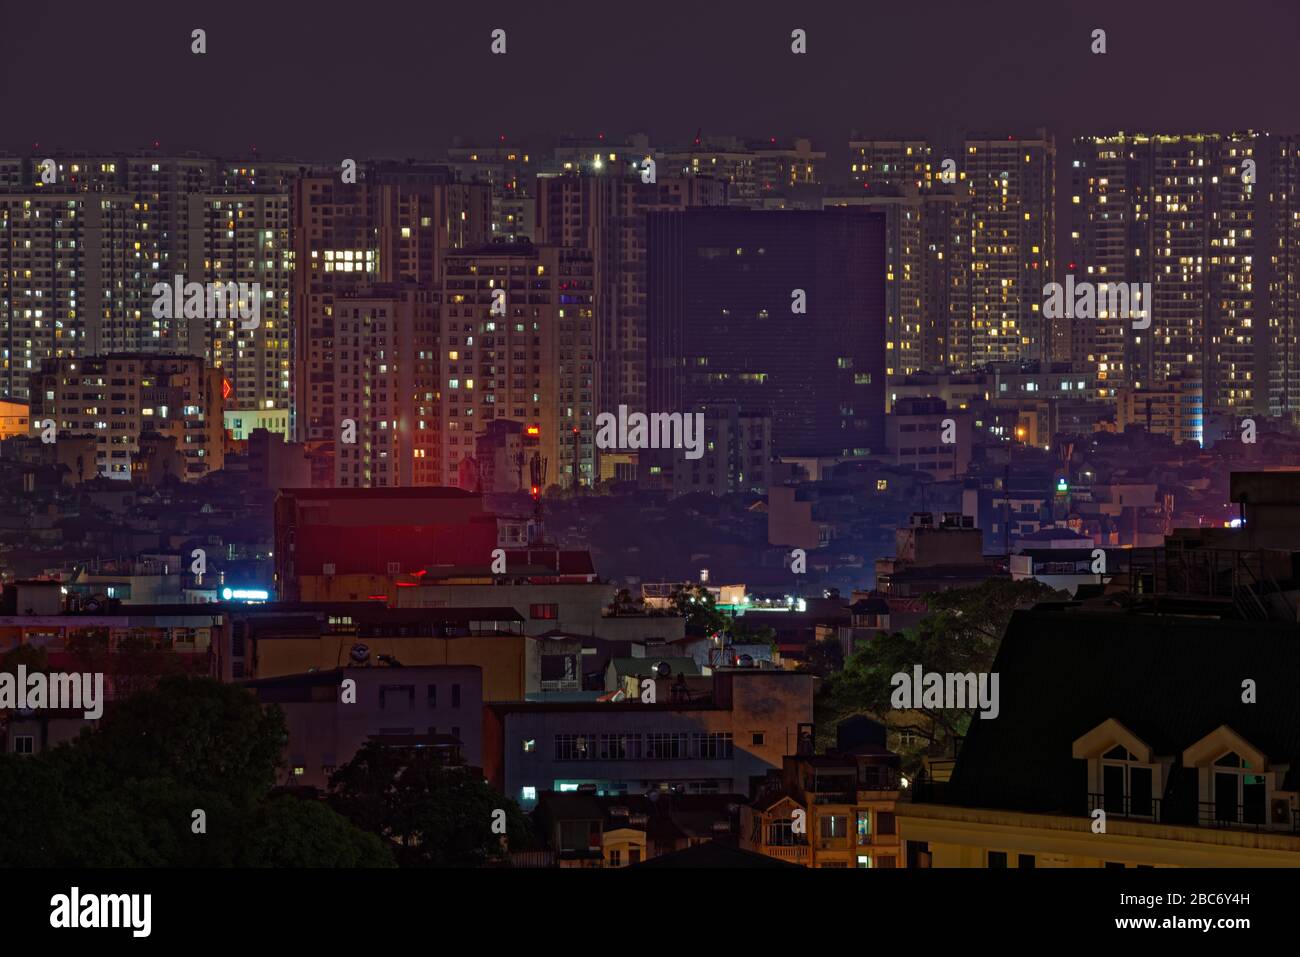 Night city scene of apartment buildings in Bach Dang district of Hanoi in Vietnam Stock Photo